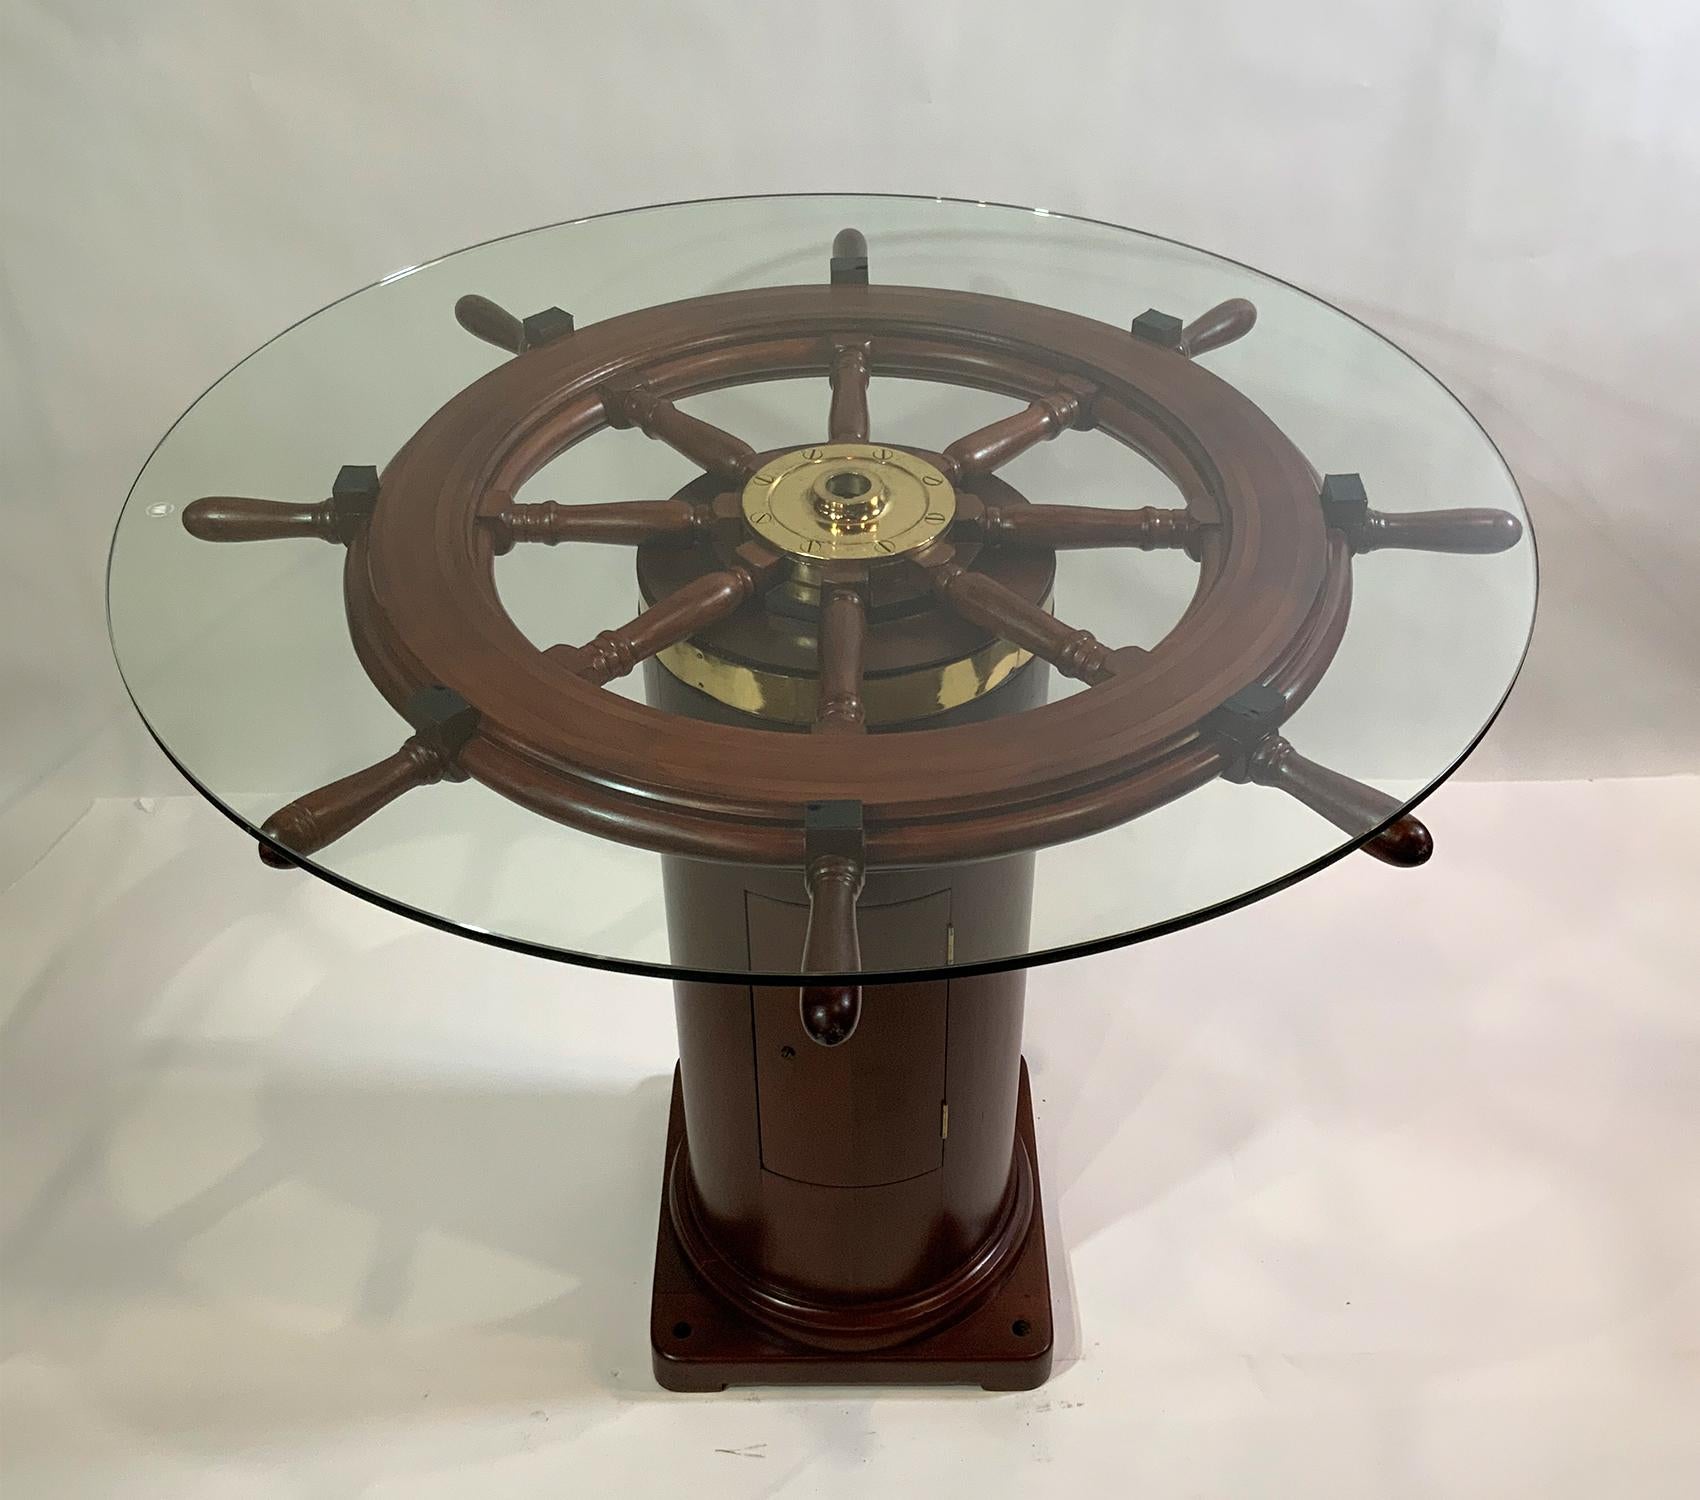 Antique ships wheel fitted to a binnacle base creating a custom bistro table. The wheel and binnacle base have been meticulously sanded, stained and varnished. The brass hub has been meticulously polished and lacquered. A tempered glass top one half